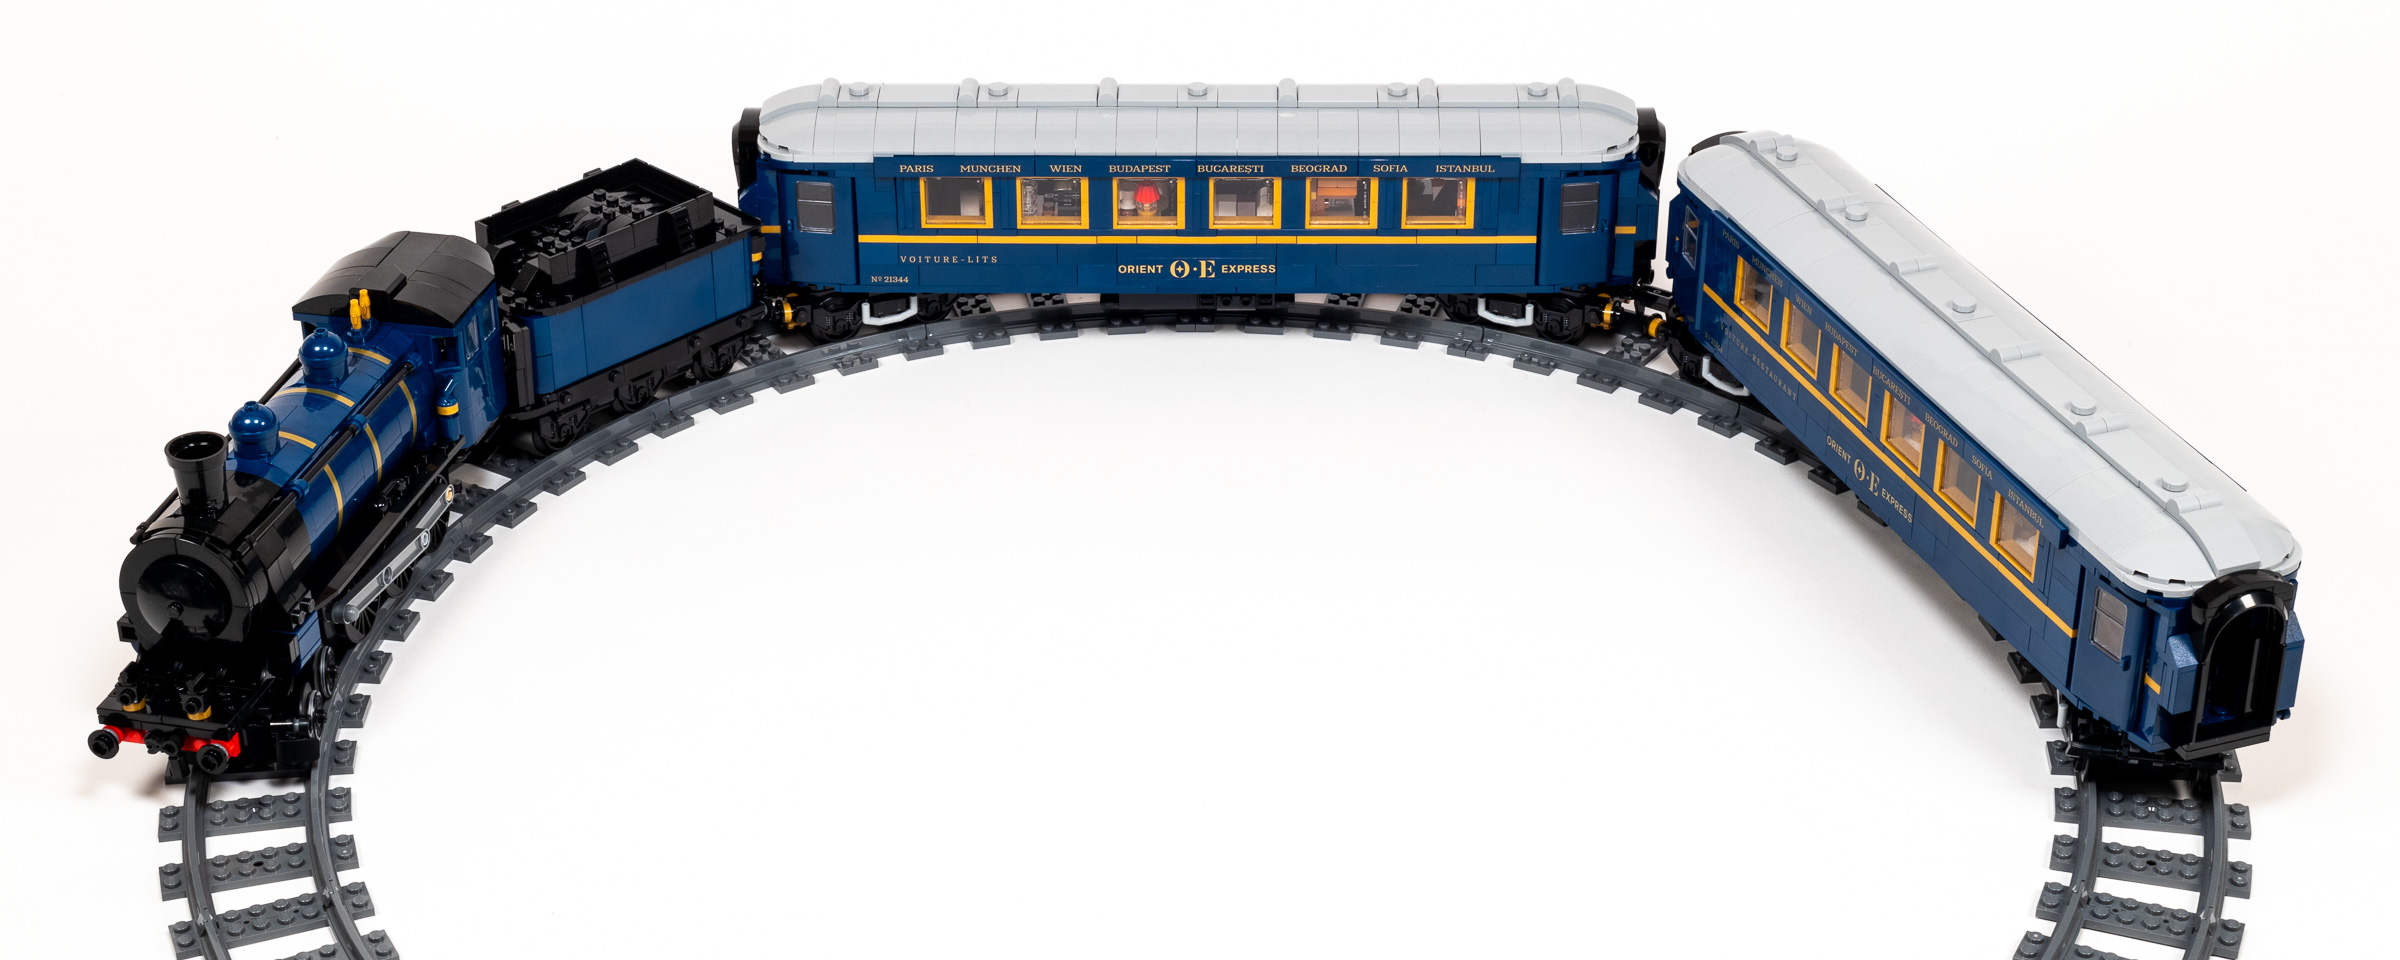 LEGO Orient Express Train leaked as set number 21344